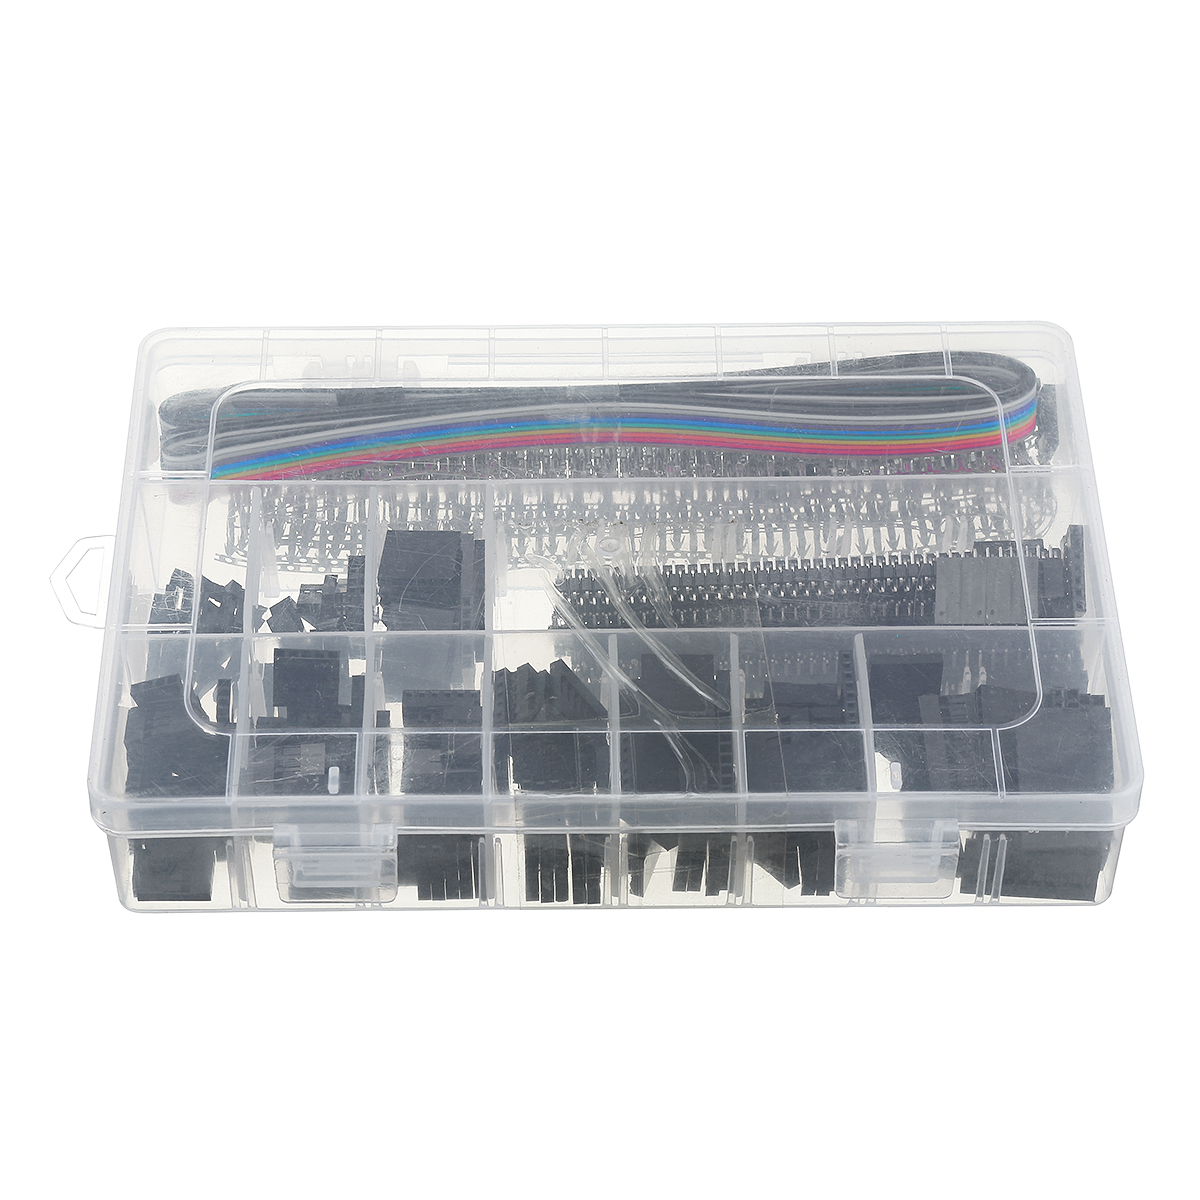 635Pcs Dupont Connector Housing Male/Female Pin Connector 40 Pin 2.54mm Pitch Pin Headers and 10 Wire Rainbow Color Flat Ribbon IDC Wire Cable Assortment Kit